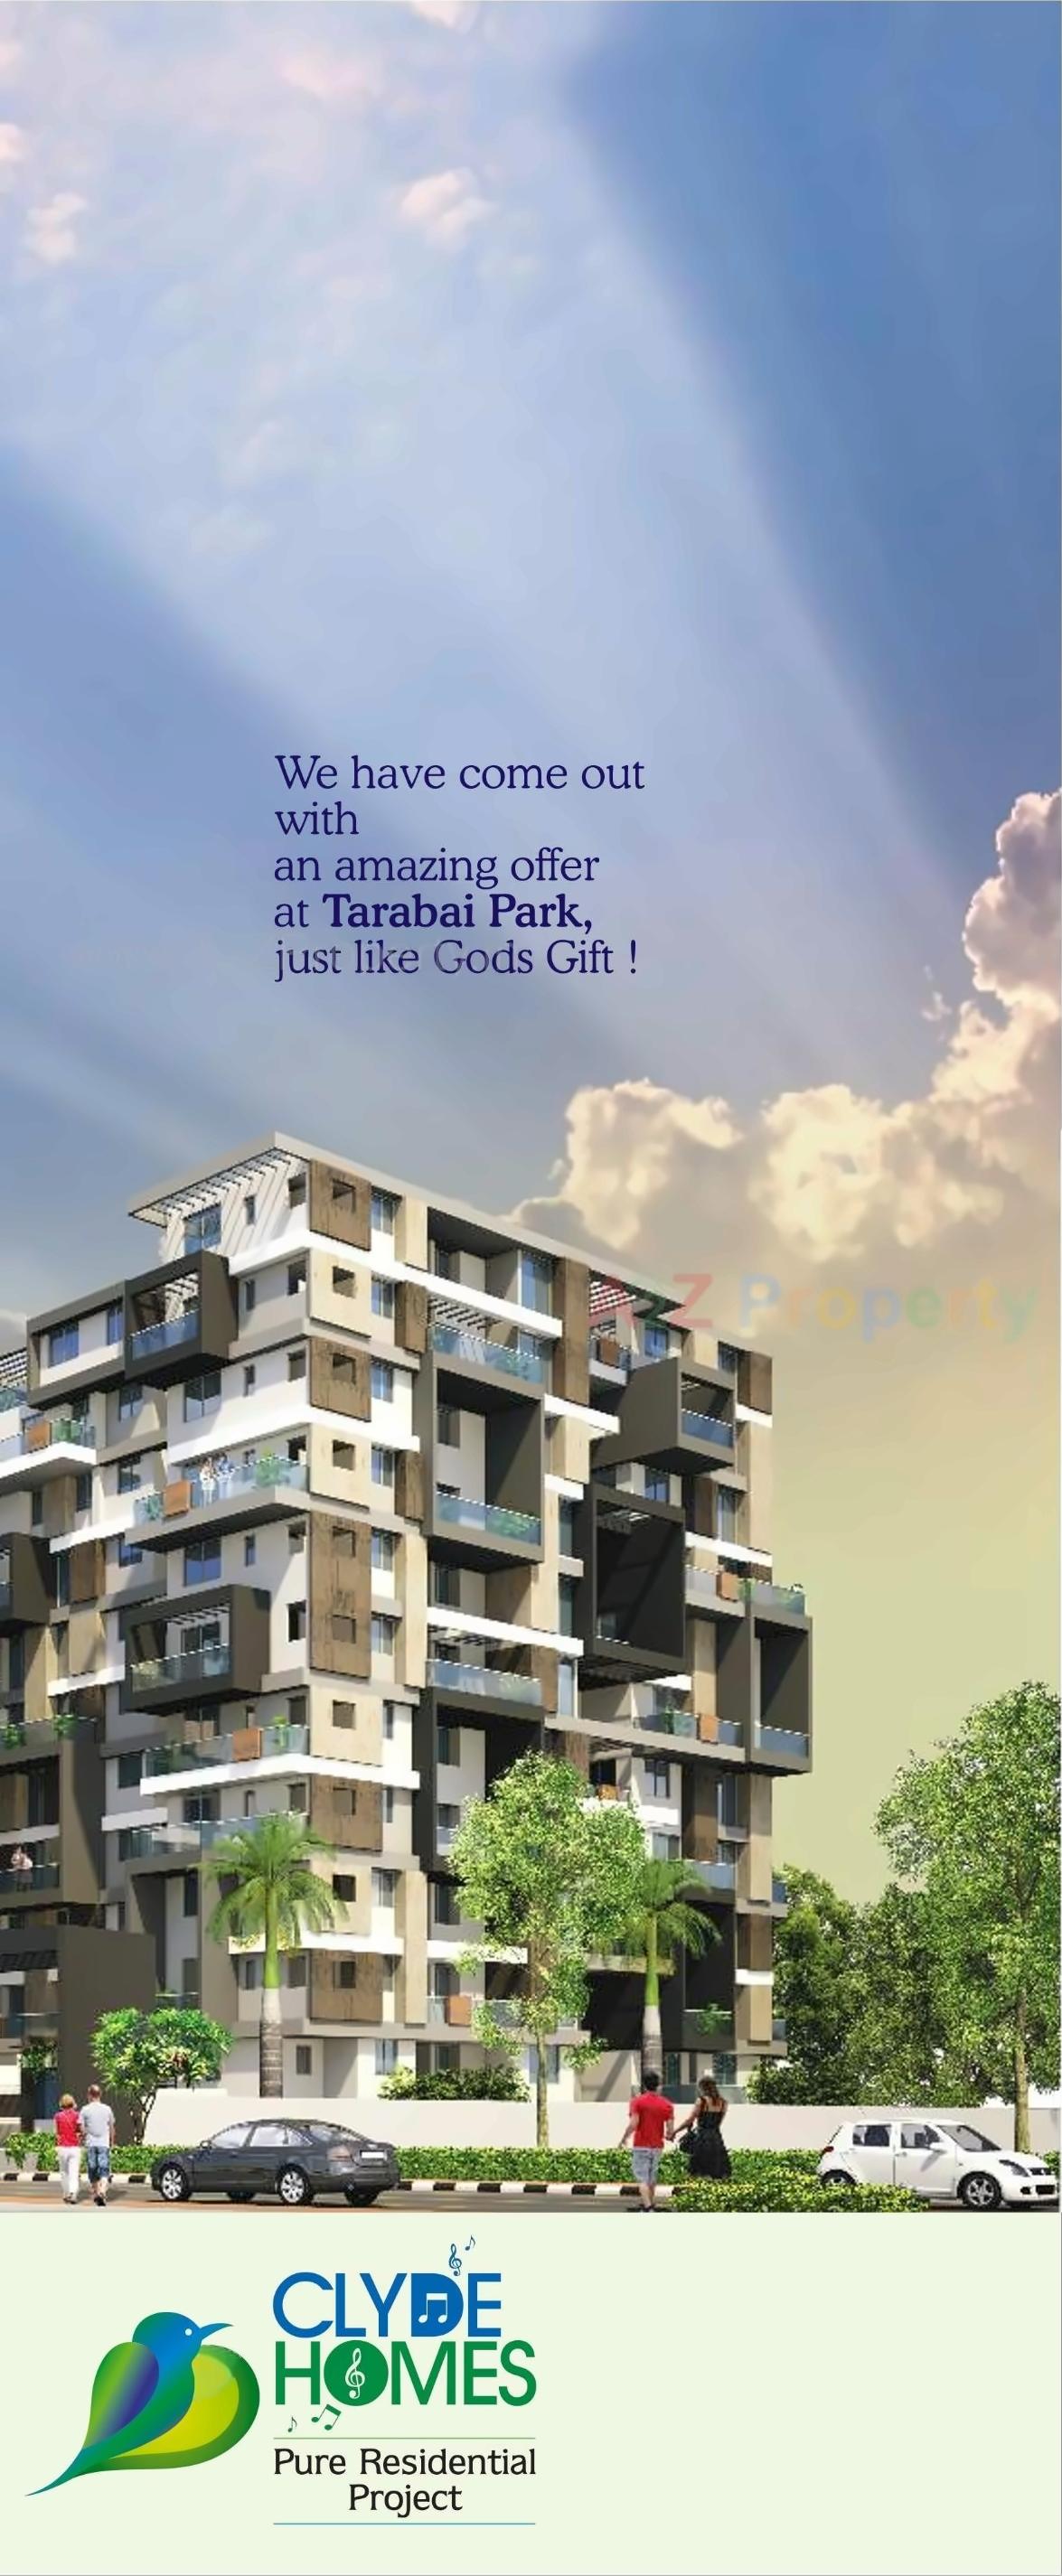 God Gifts Building in Lower Parel, Mumbai | Find Price, Gallery, Plans,  Amenities on CommonFloor.com